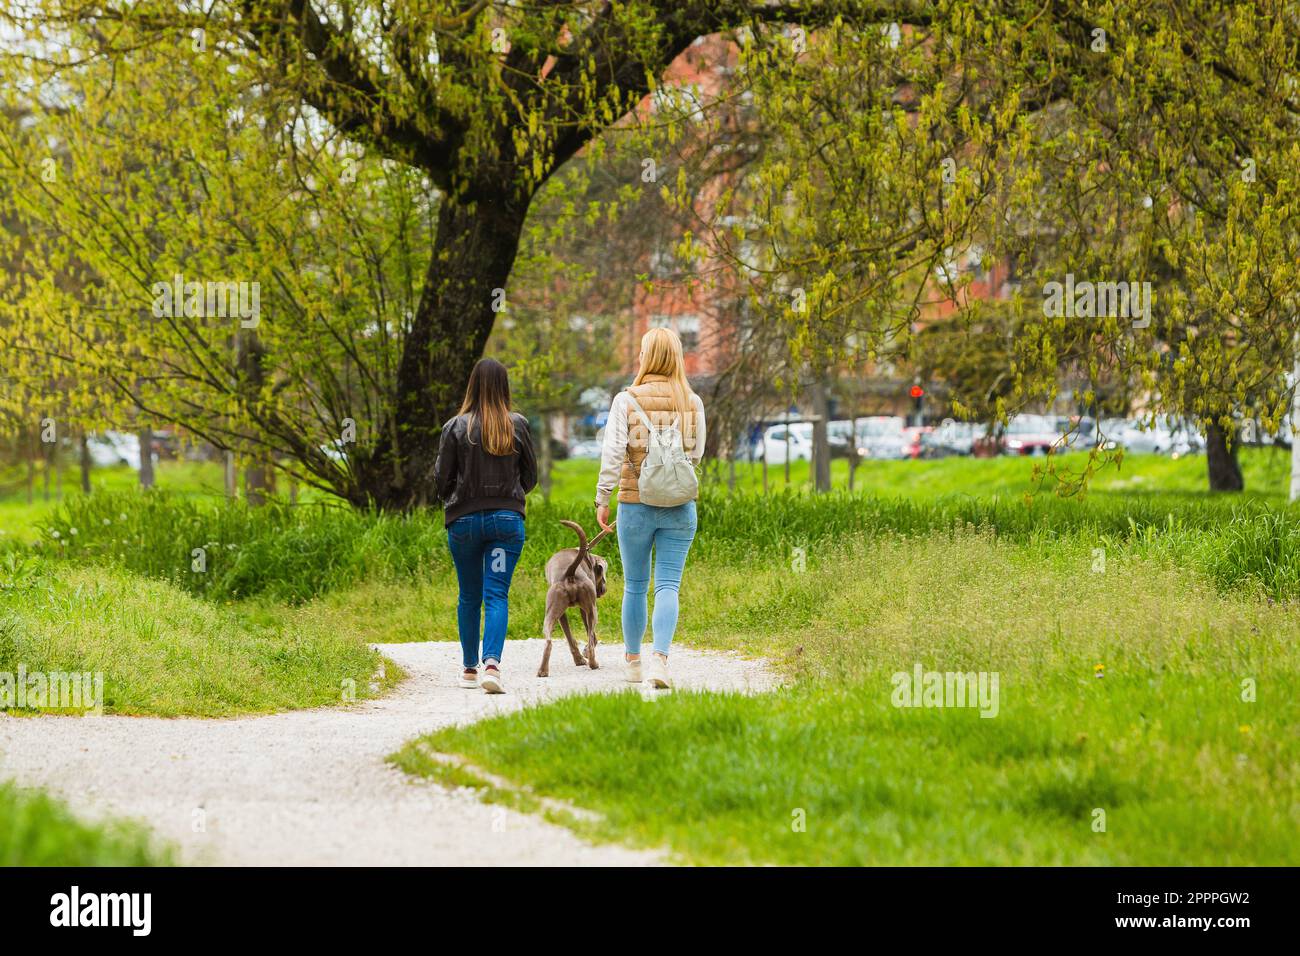 Walk the dog in the park. Two anonymous, unrecognizable friends, turned from behind, walking with the dog on a path in the middle of a public lawn. Stock Photo